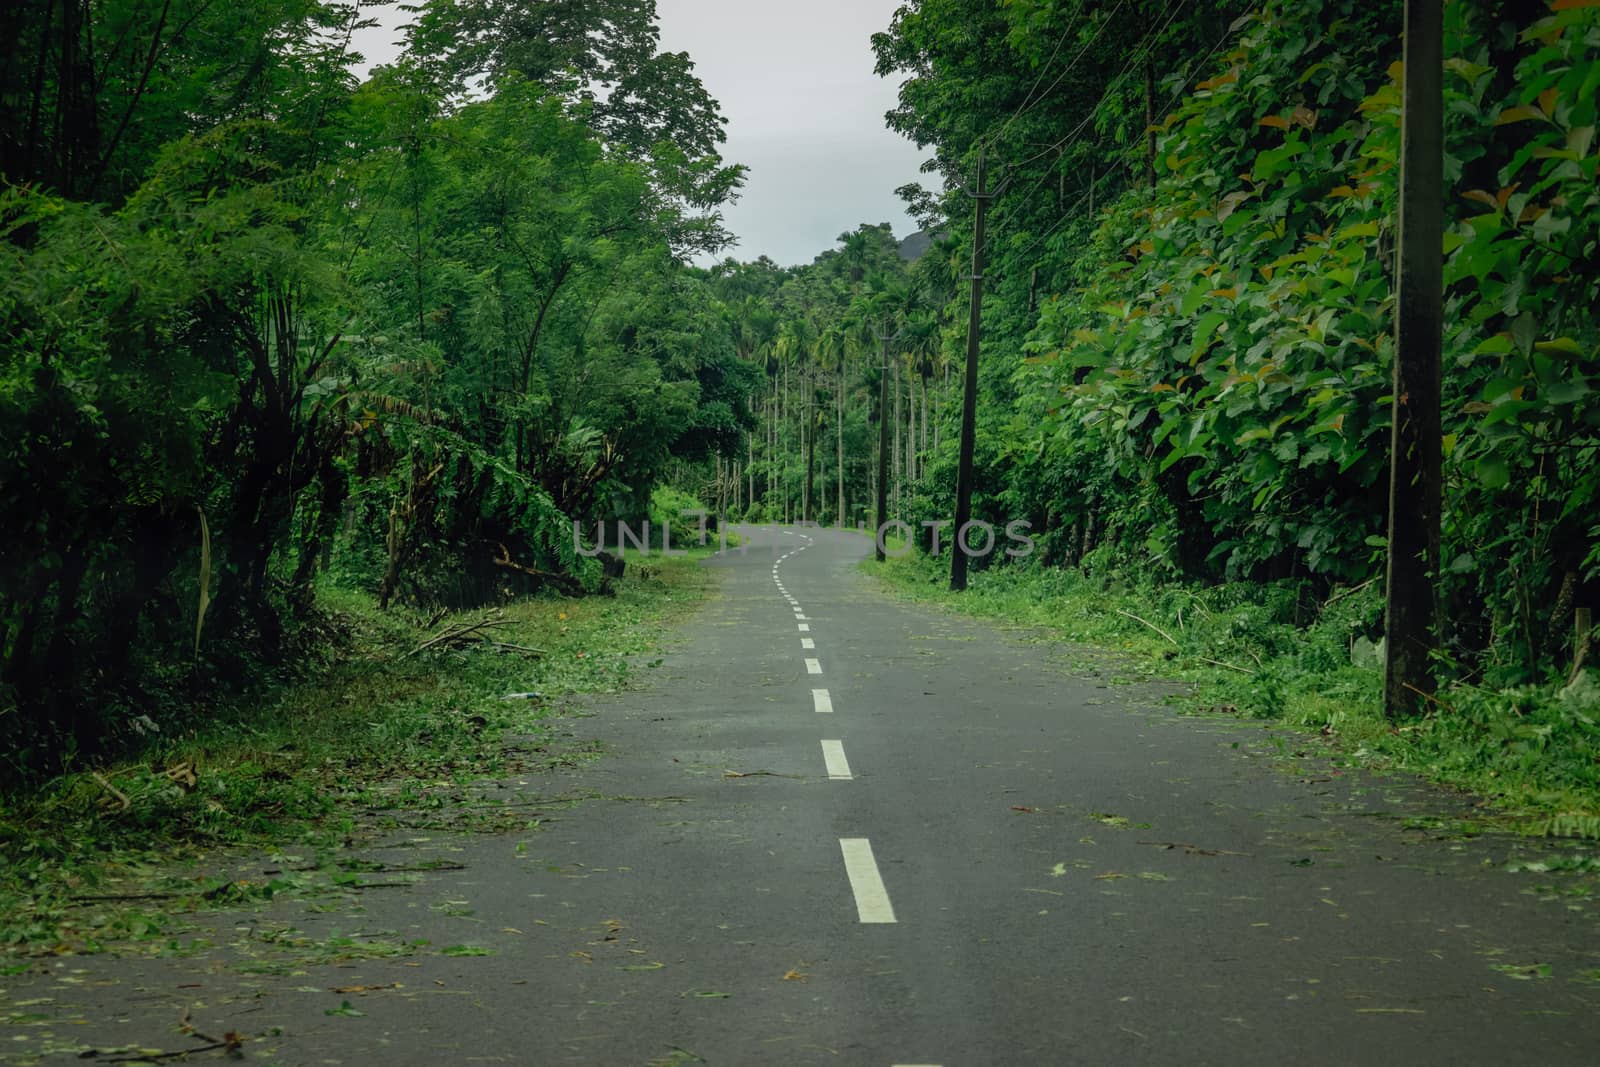 Empty road in the middle of greens toward the forest area